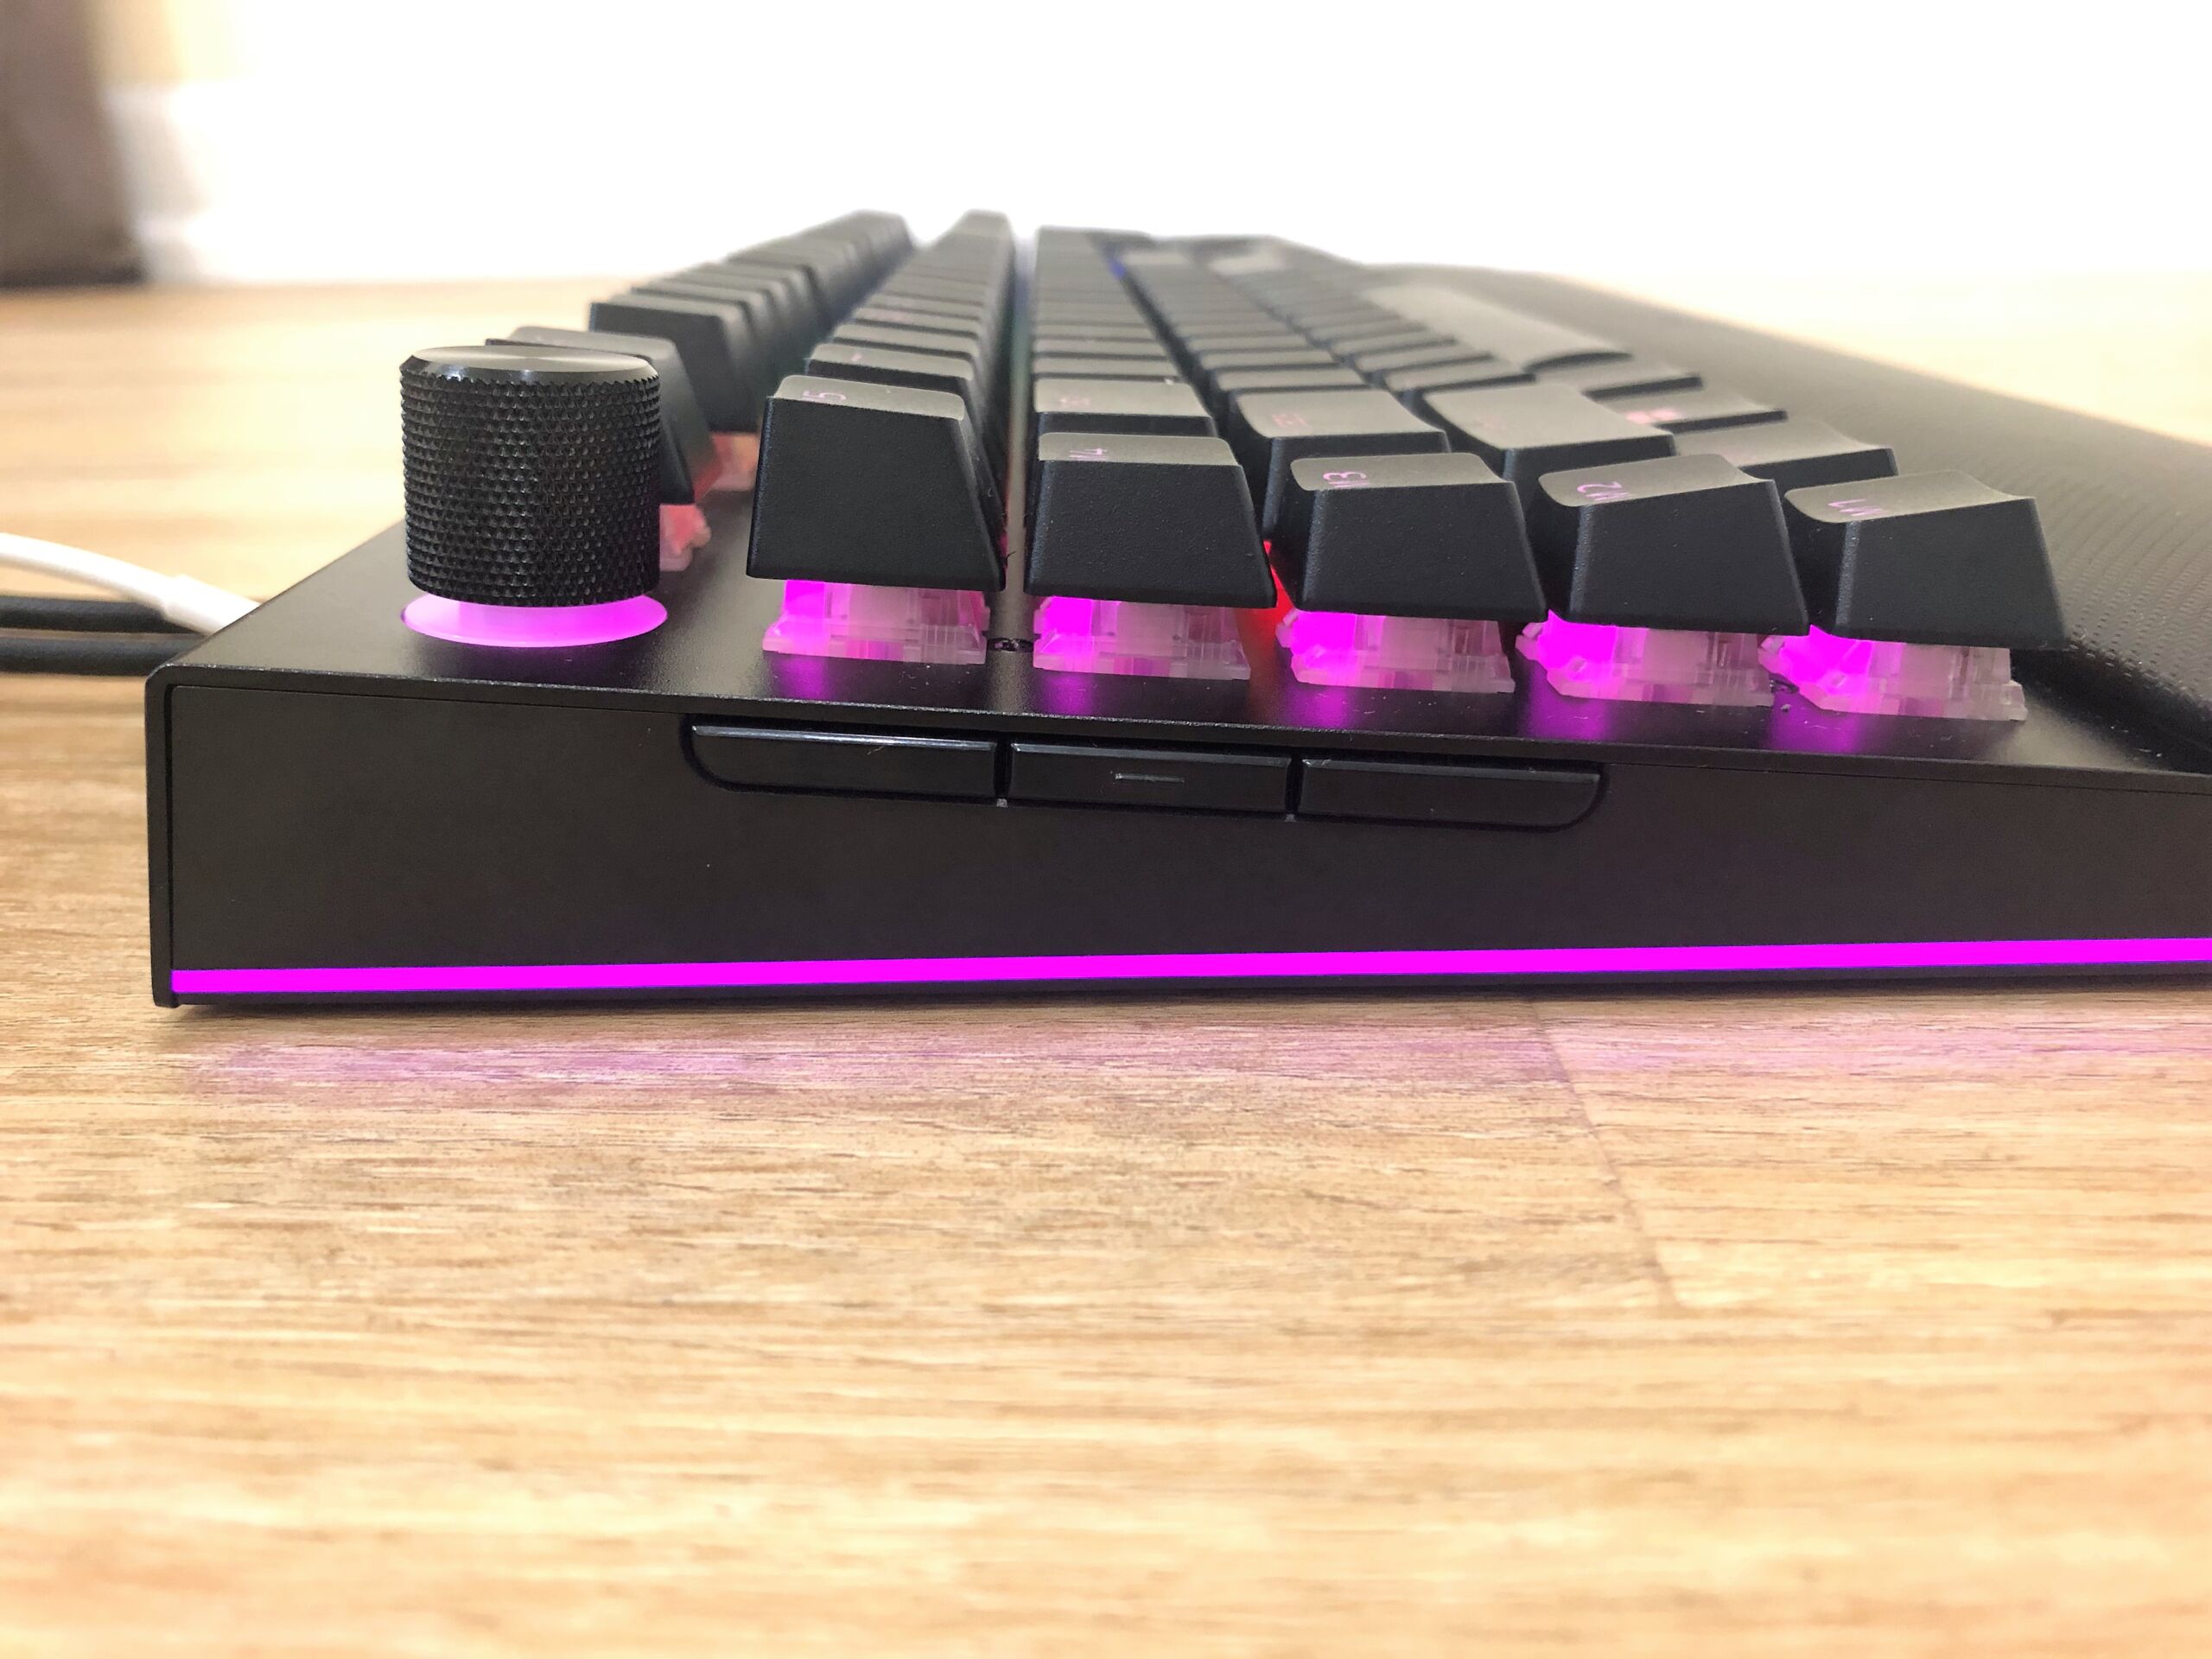 Razer BlackWidow V4 Pro Mechanical Gaming Keyboard with Green Switches,  Doubleshot Keycaps, Command Dial, Chroma RGB, Magnetic Wrist Rest